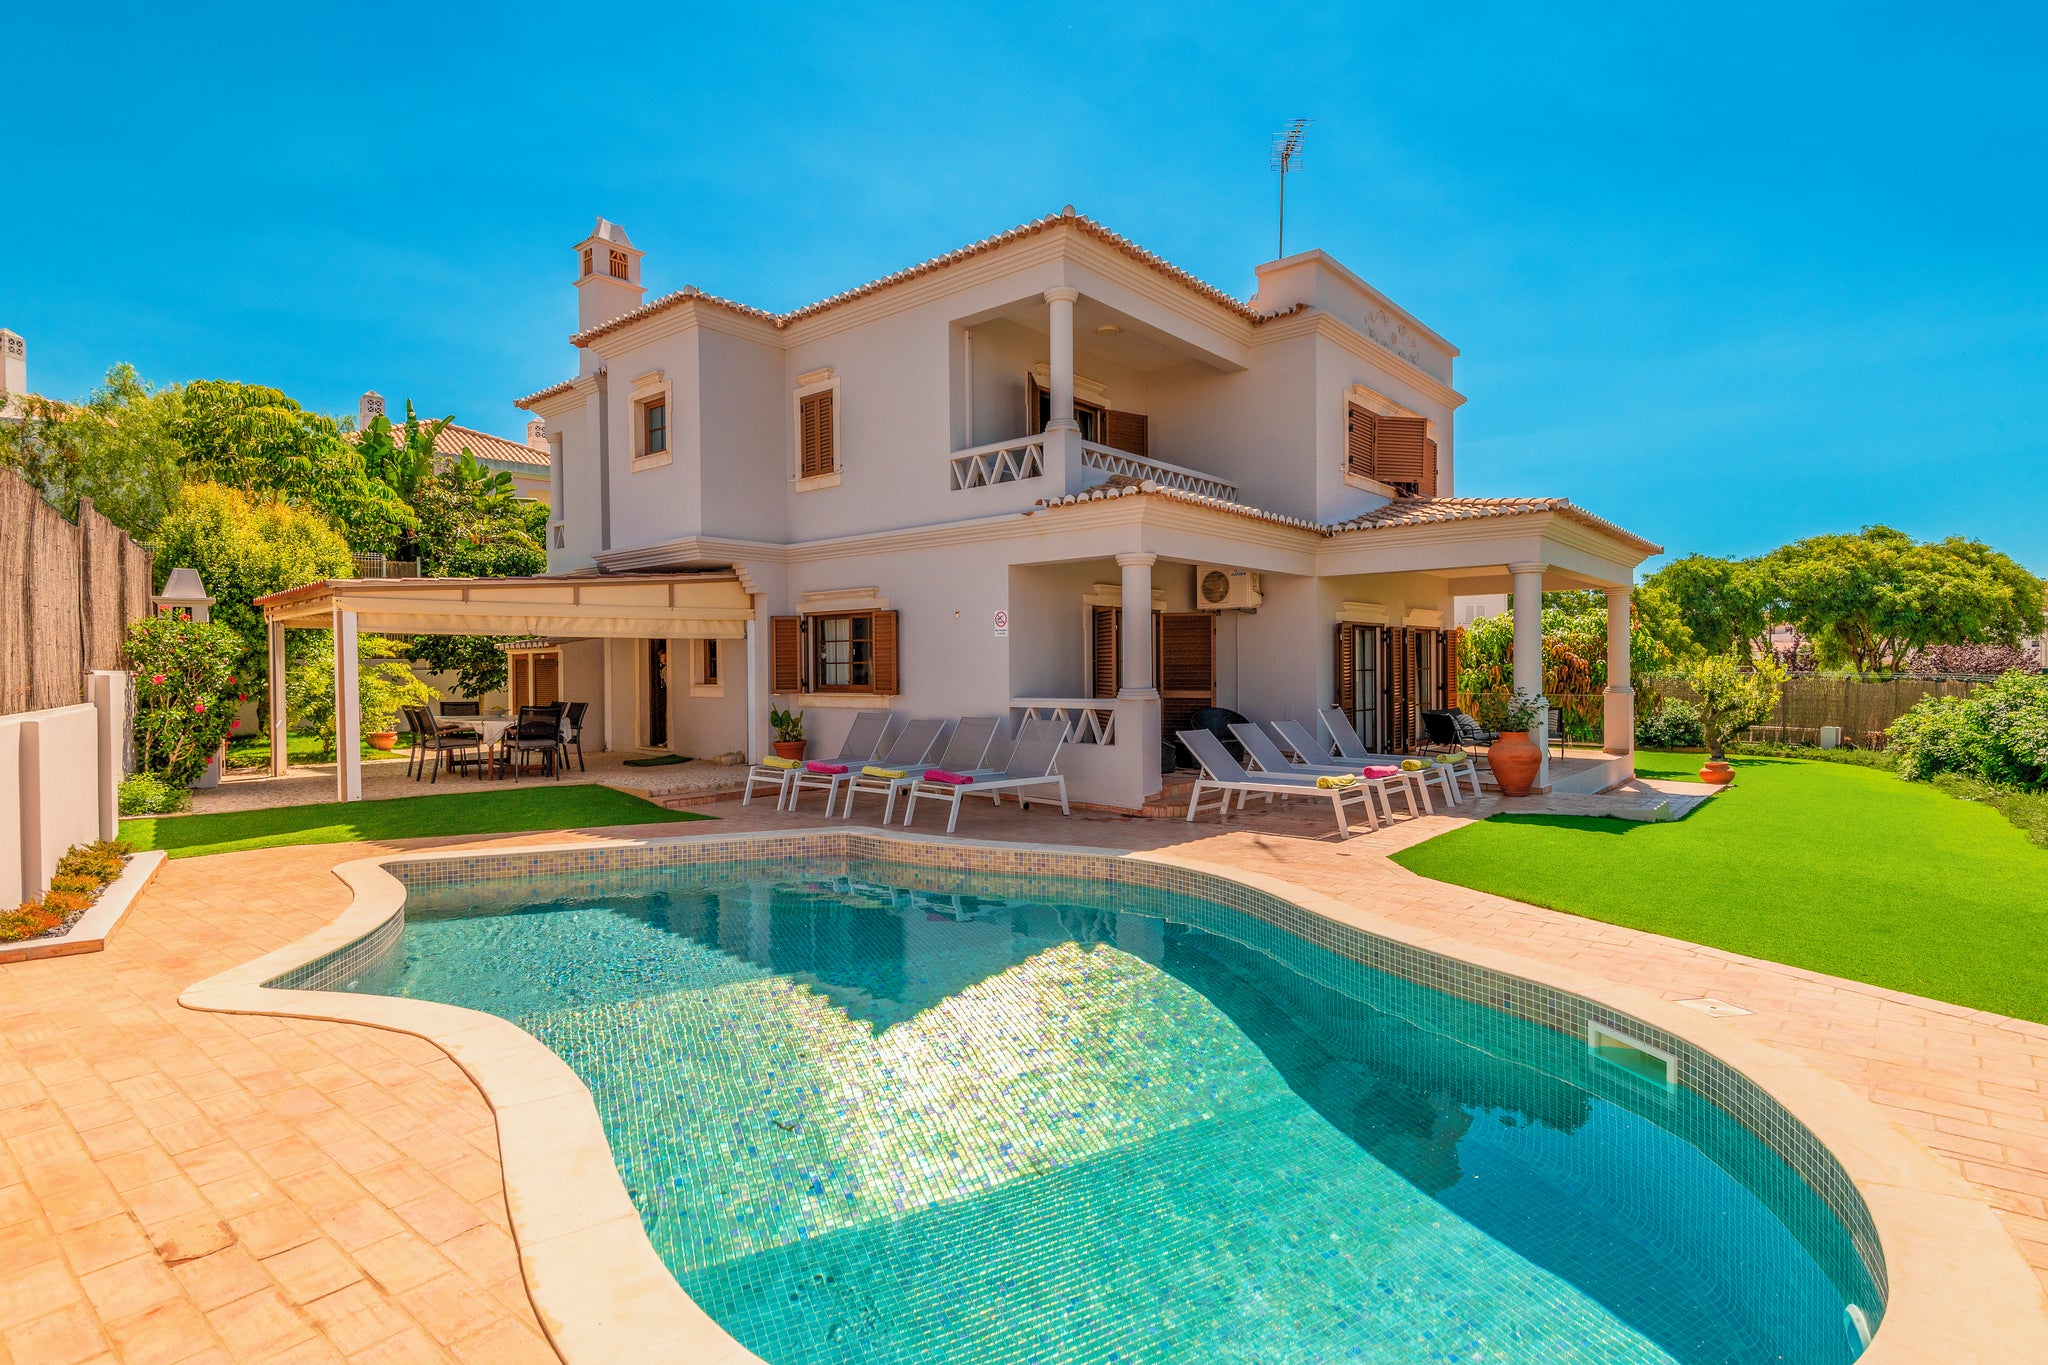 With secluded surroundings and private pools, villa breaks - such as a stay at Villa Mangas in the Algarve - make for the ultimate getaway